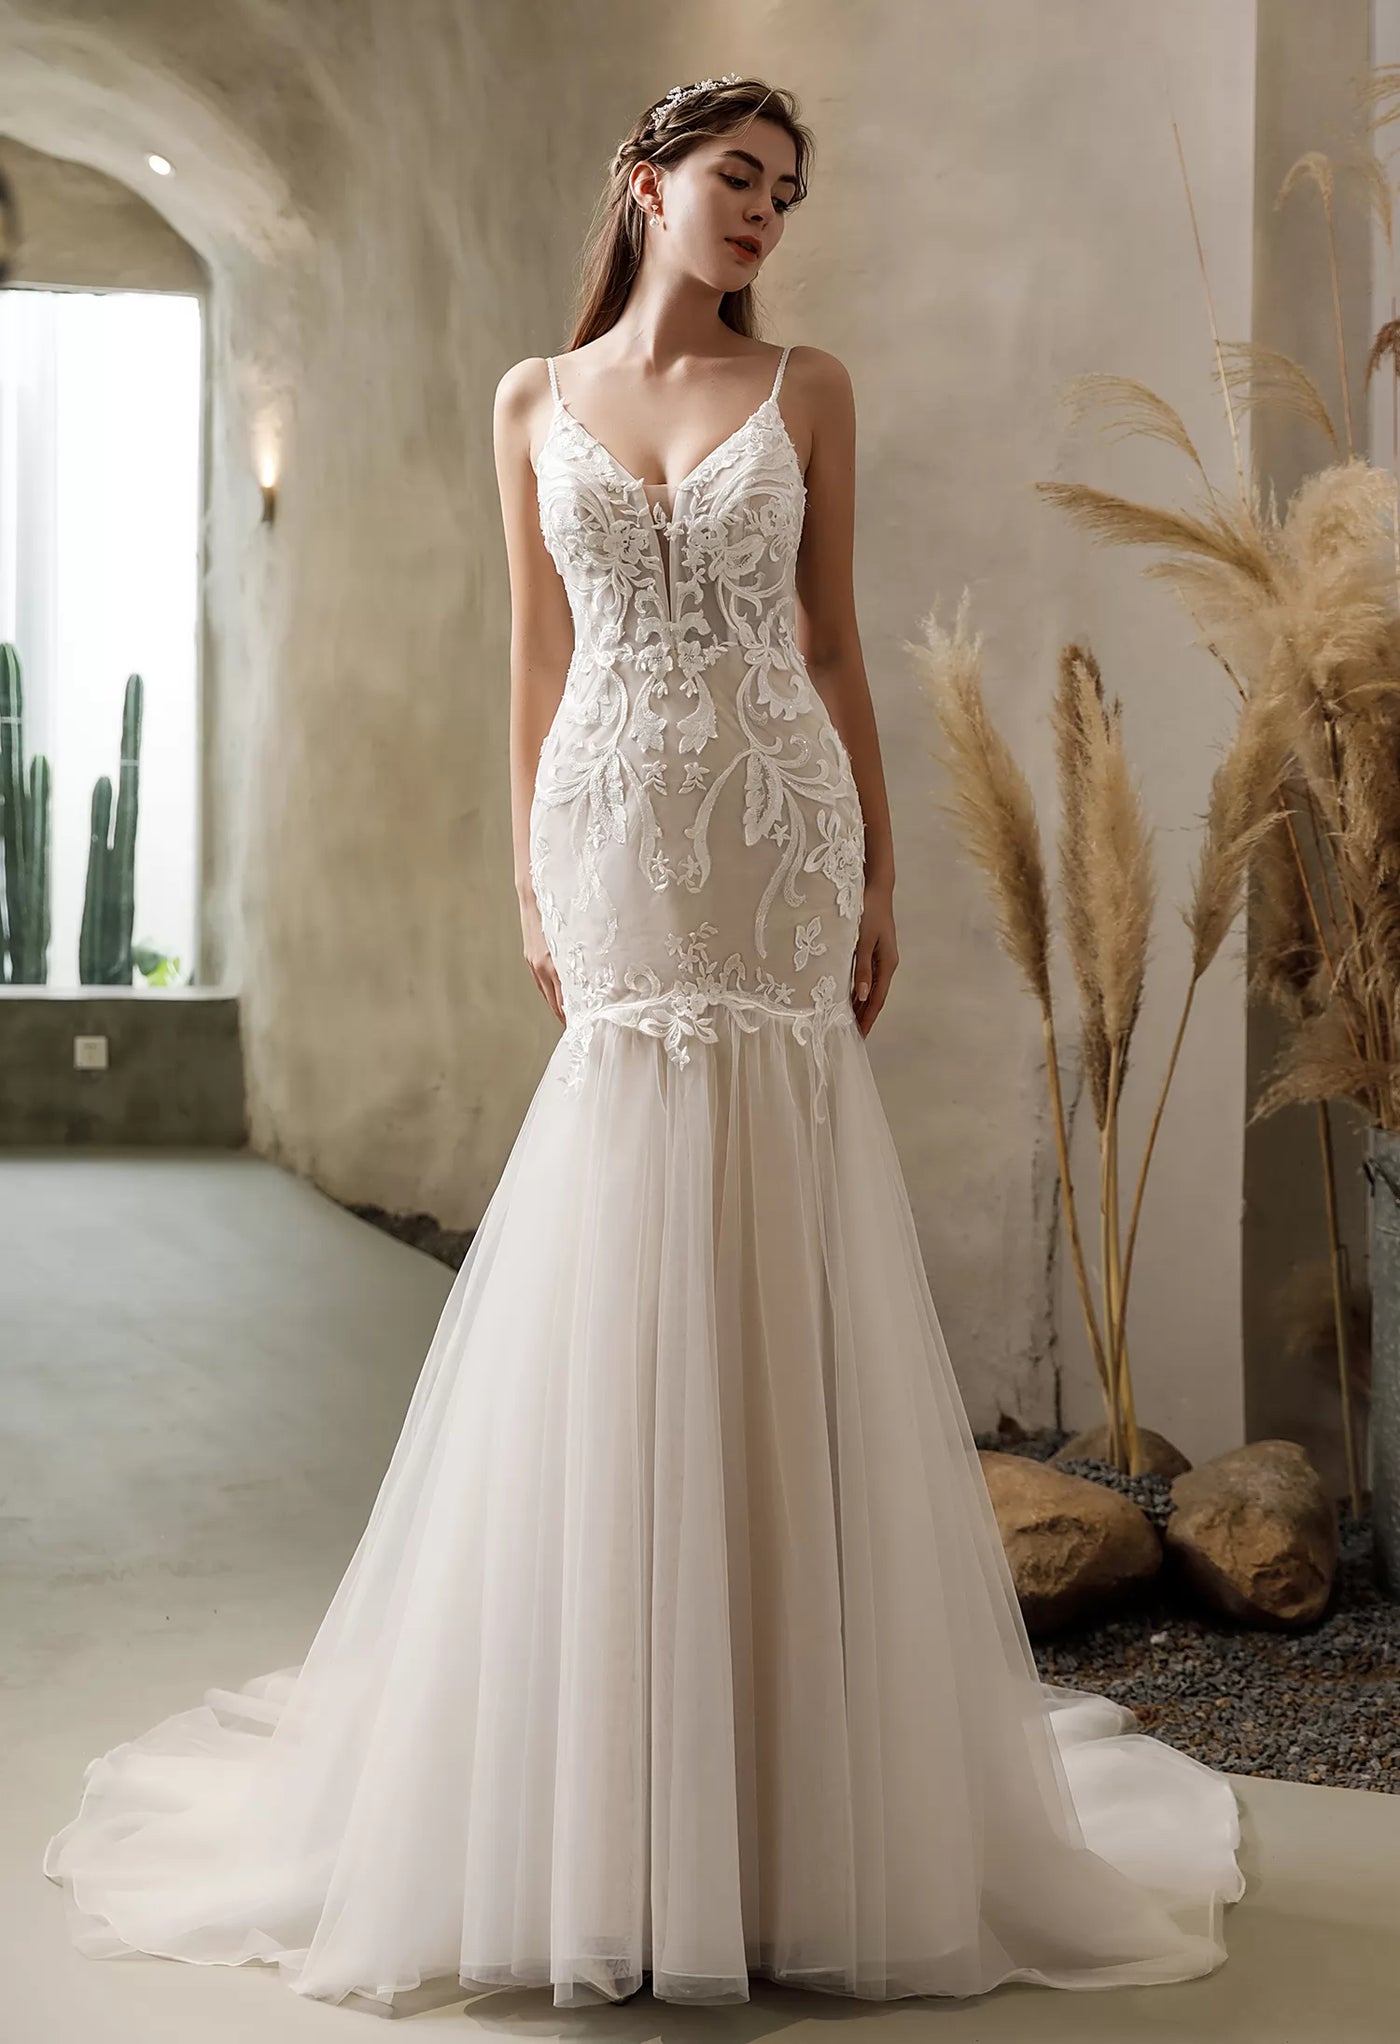 Lace Detachable Bell Sleeve Keyhole Back Mermaid Bridal Gown